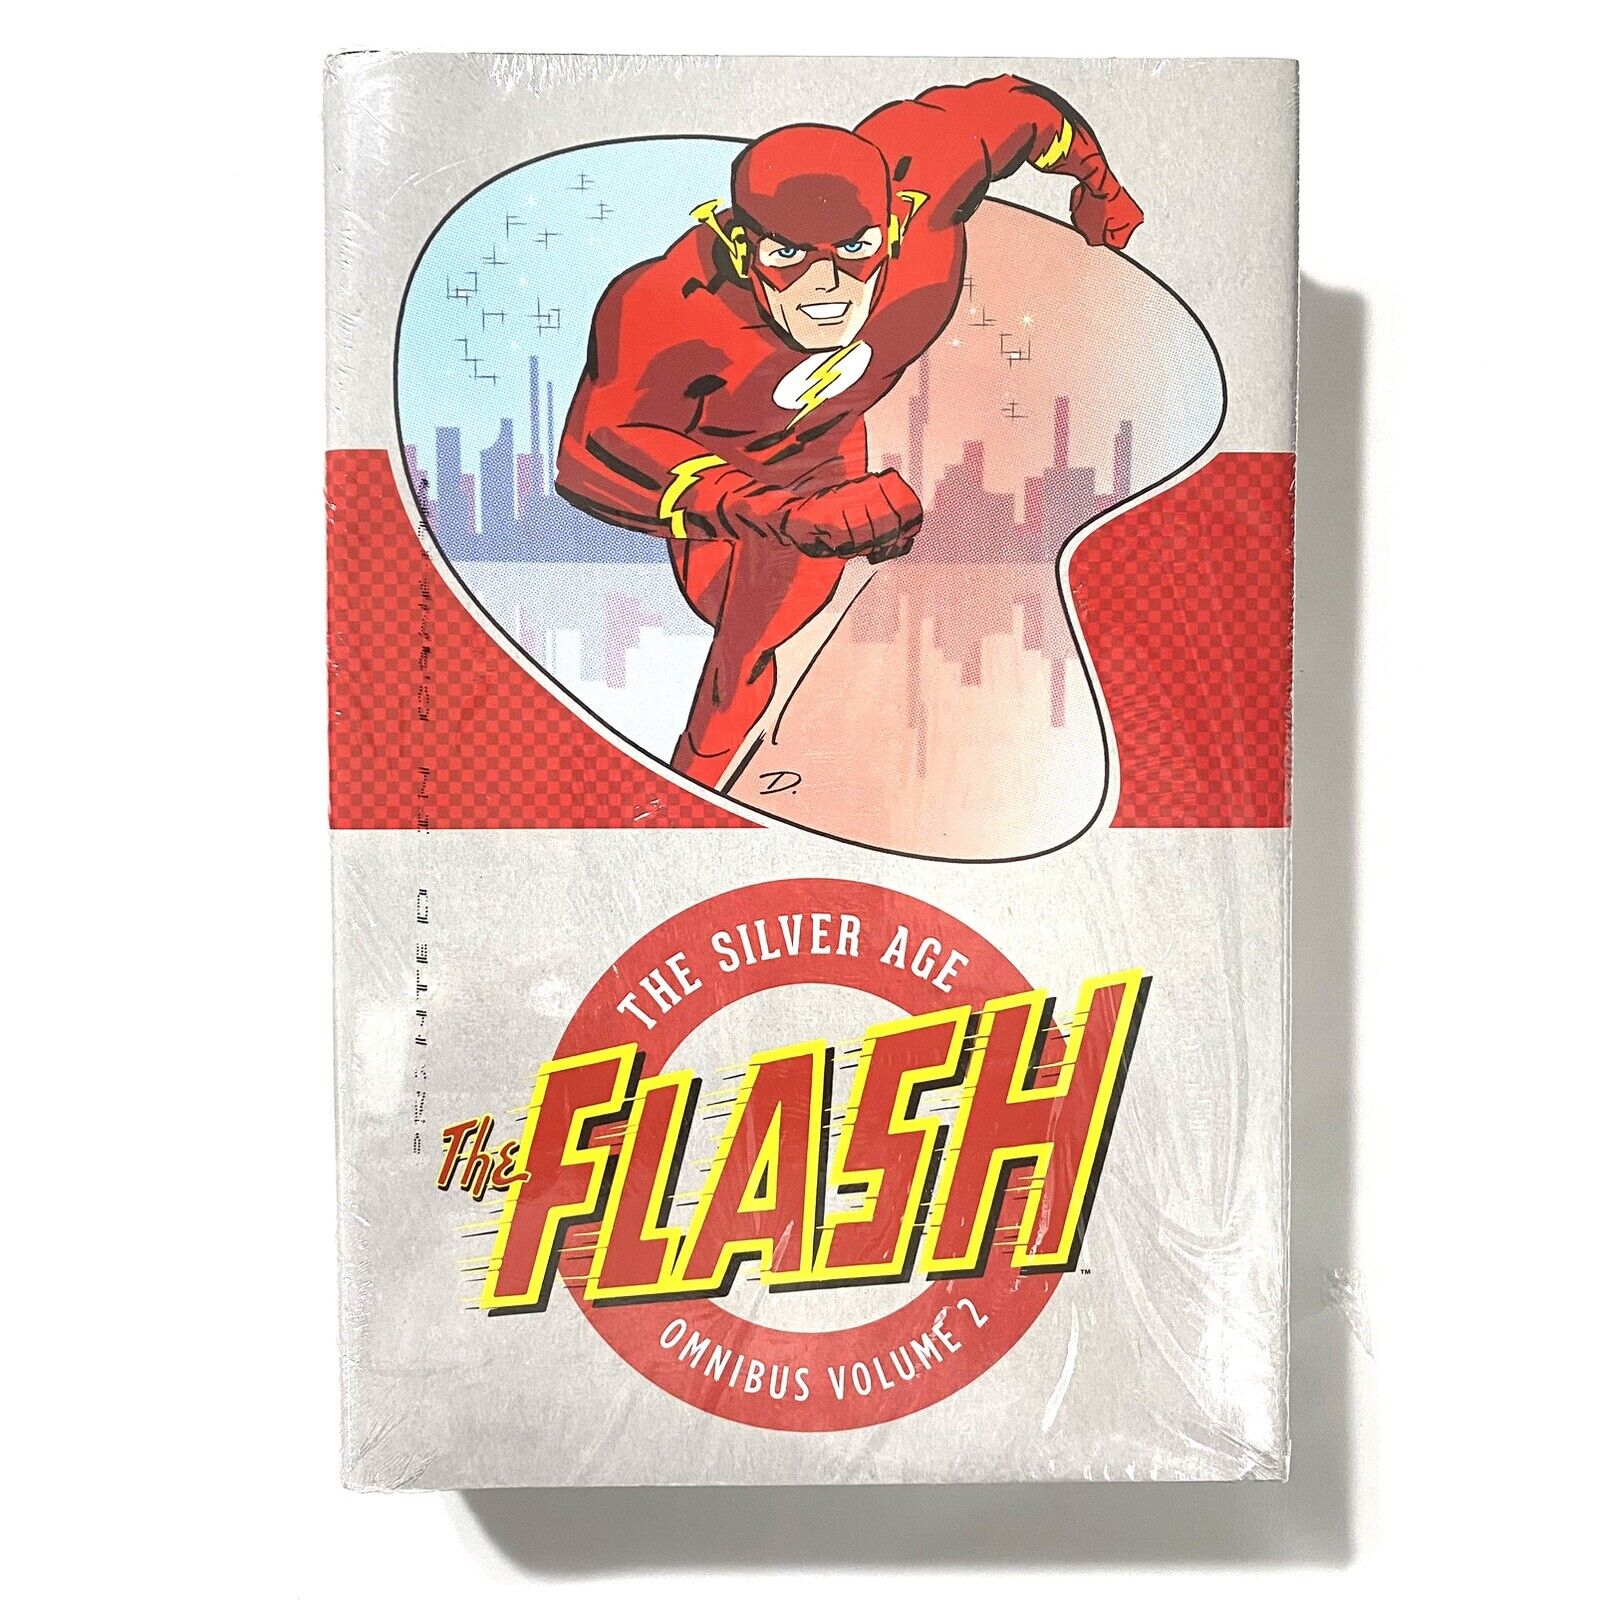 Flash Silver Age Omnibus Vol 2 DC Comics New Sealed $5 Flat Combined Shipping